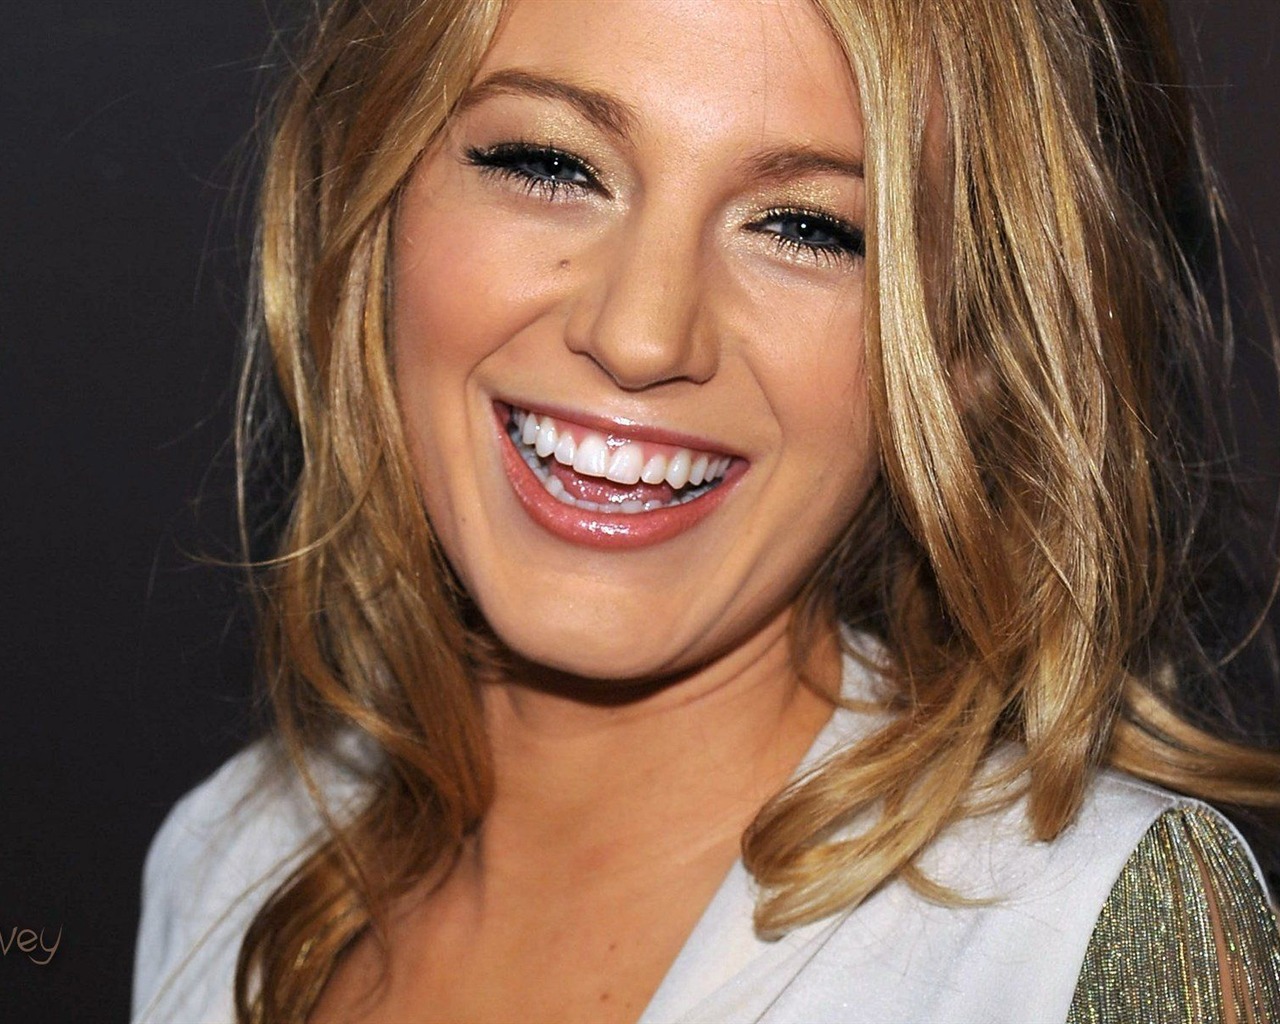 Blake Lively #010 - 1280x1024 Wallpapers Pictures Photos Images